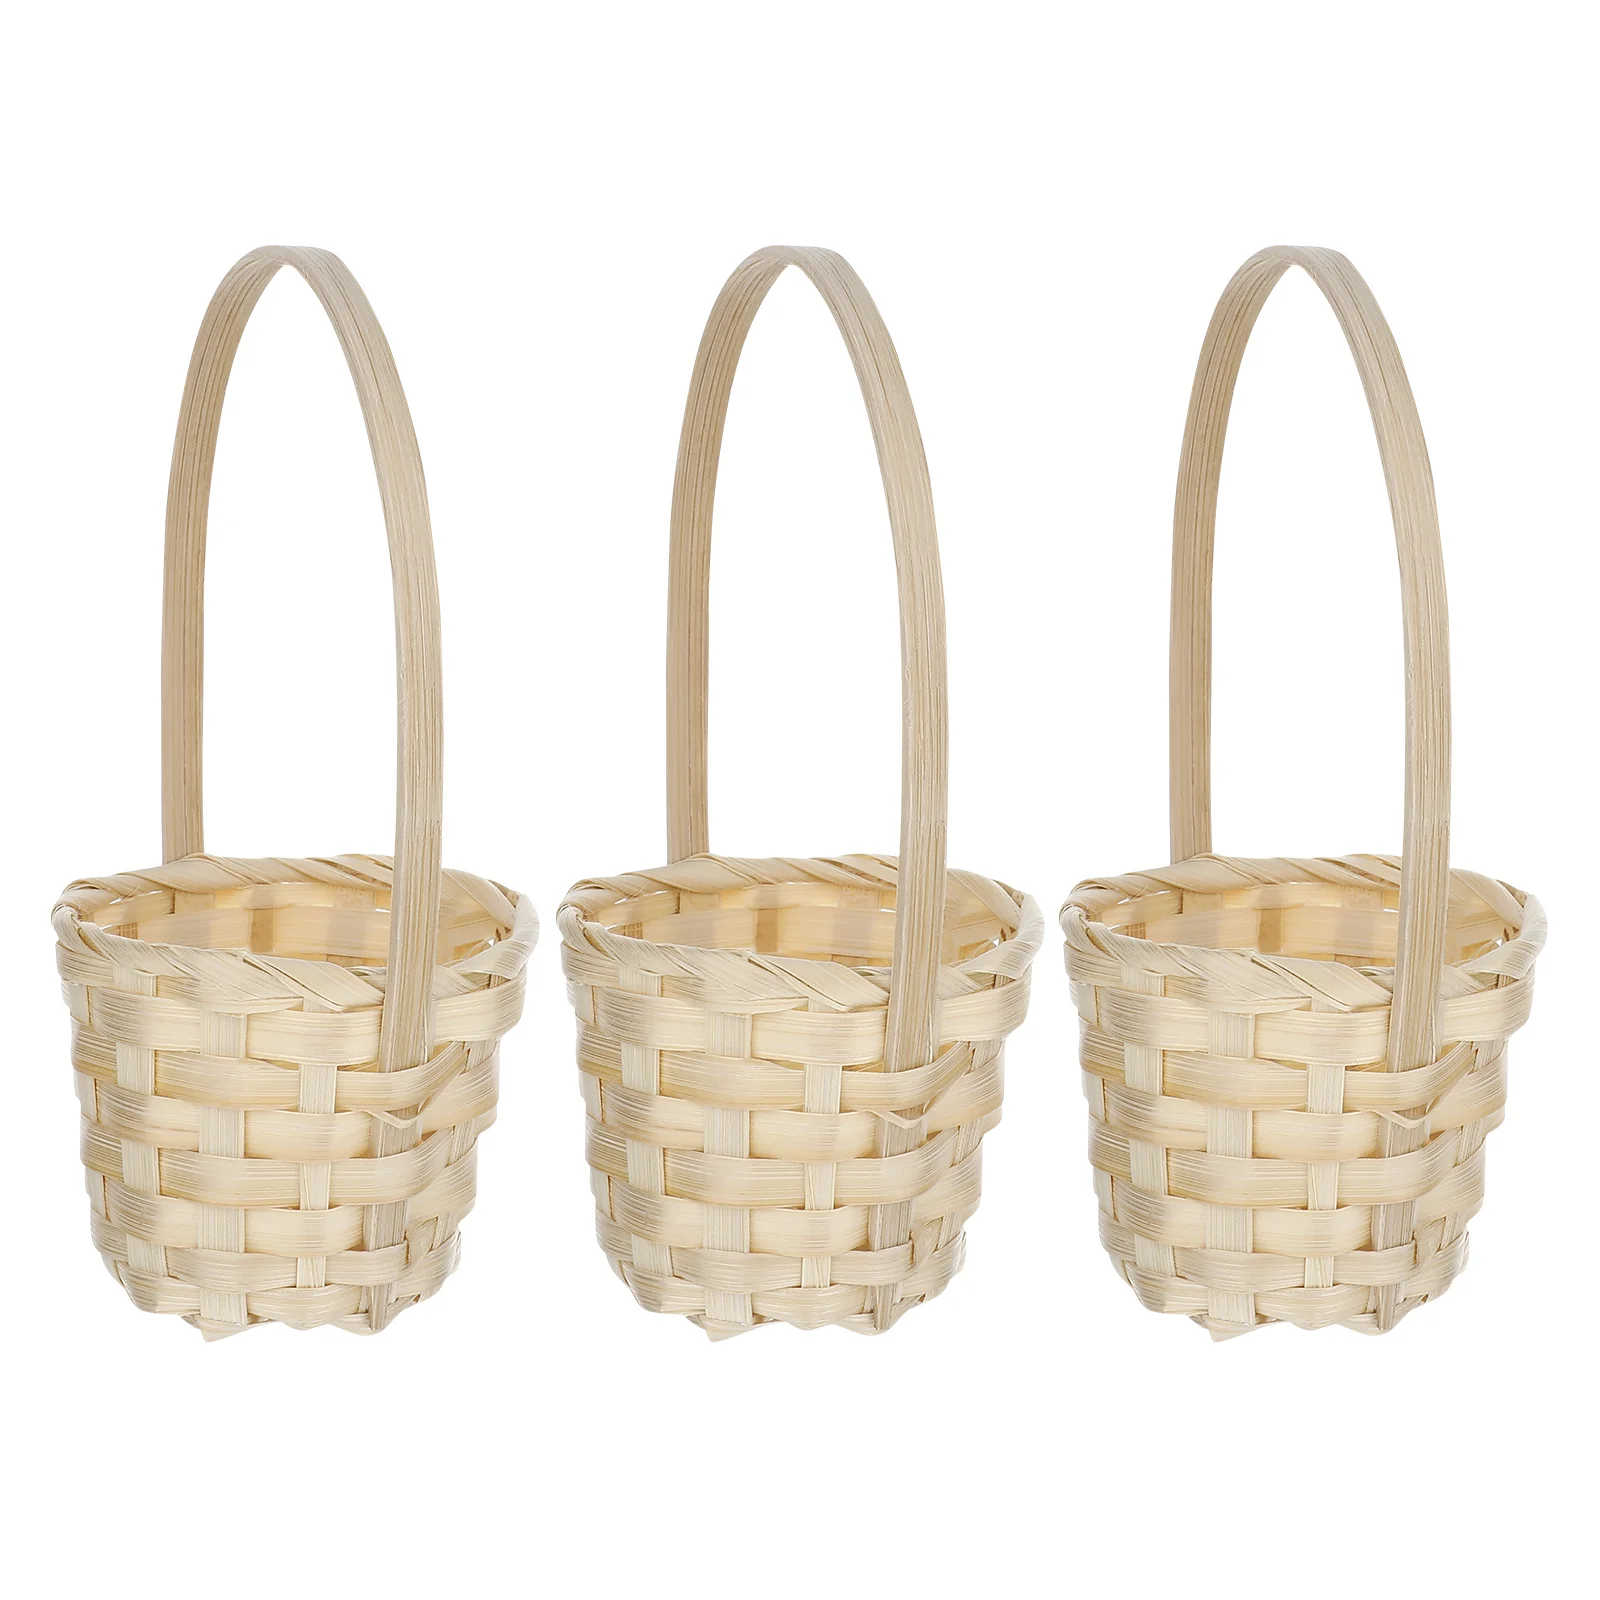 5 Pcs Tote Basket Bamboo Flower Gift Baskets Empty Mini Shopping Gifts Decorative Handle Wicker Storage